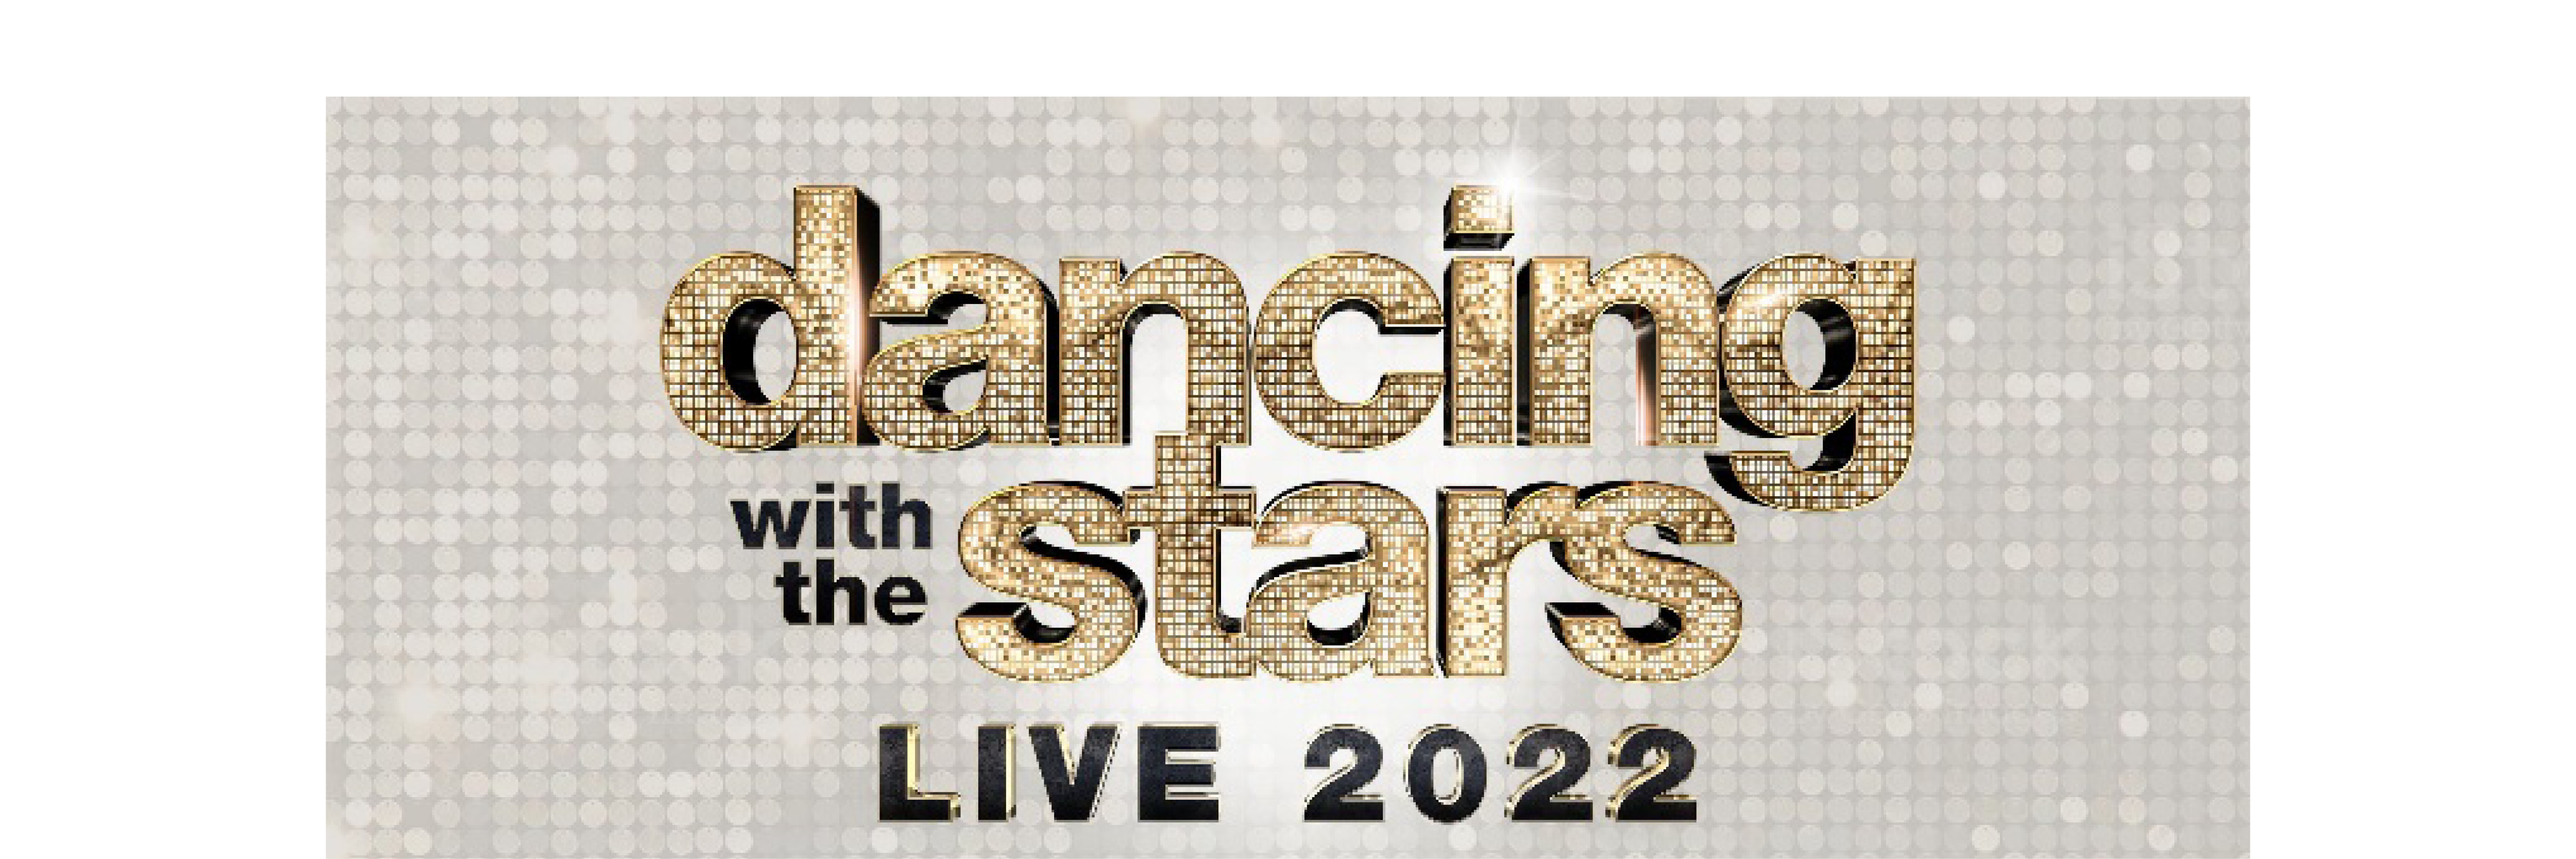 Dancing with the Stars Live 2022